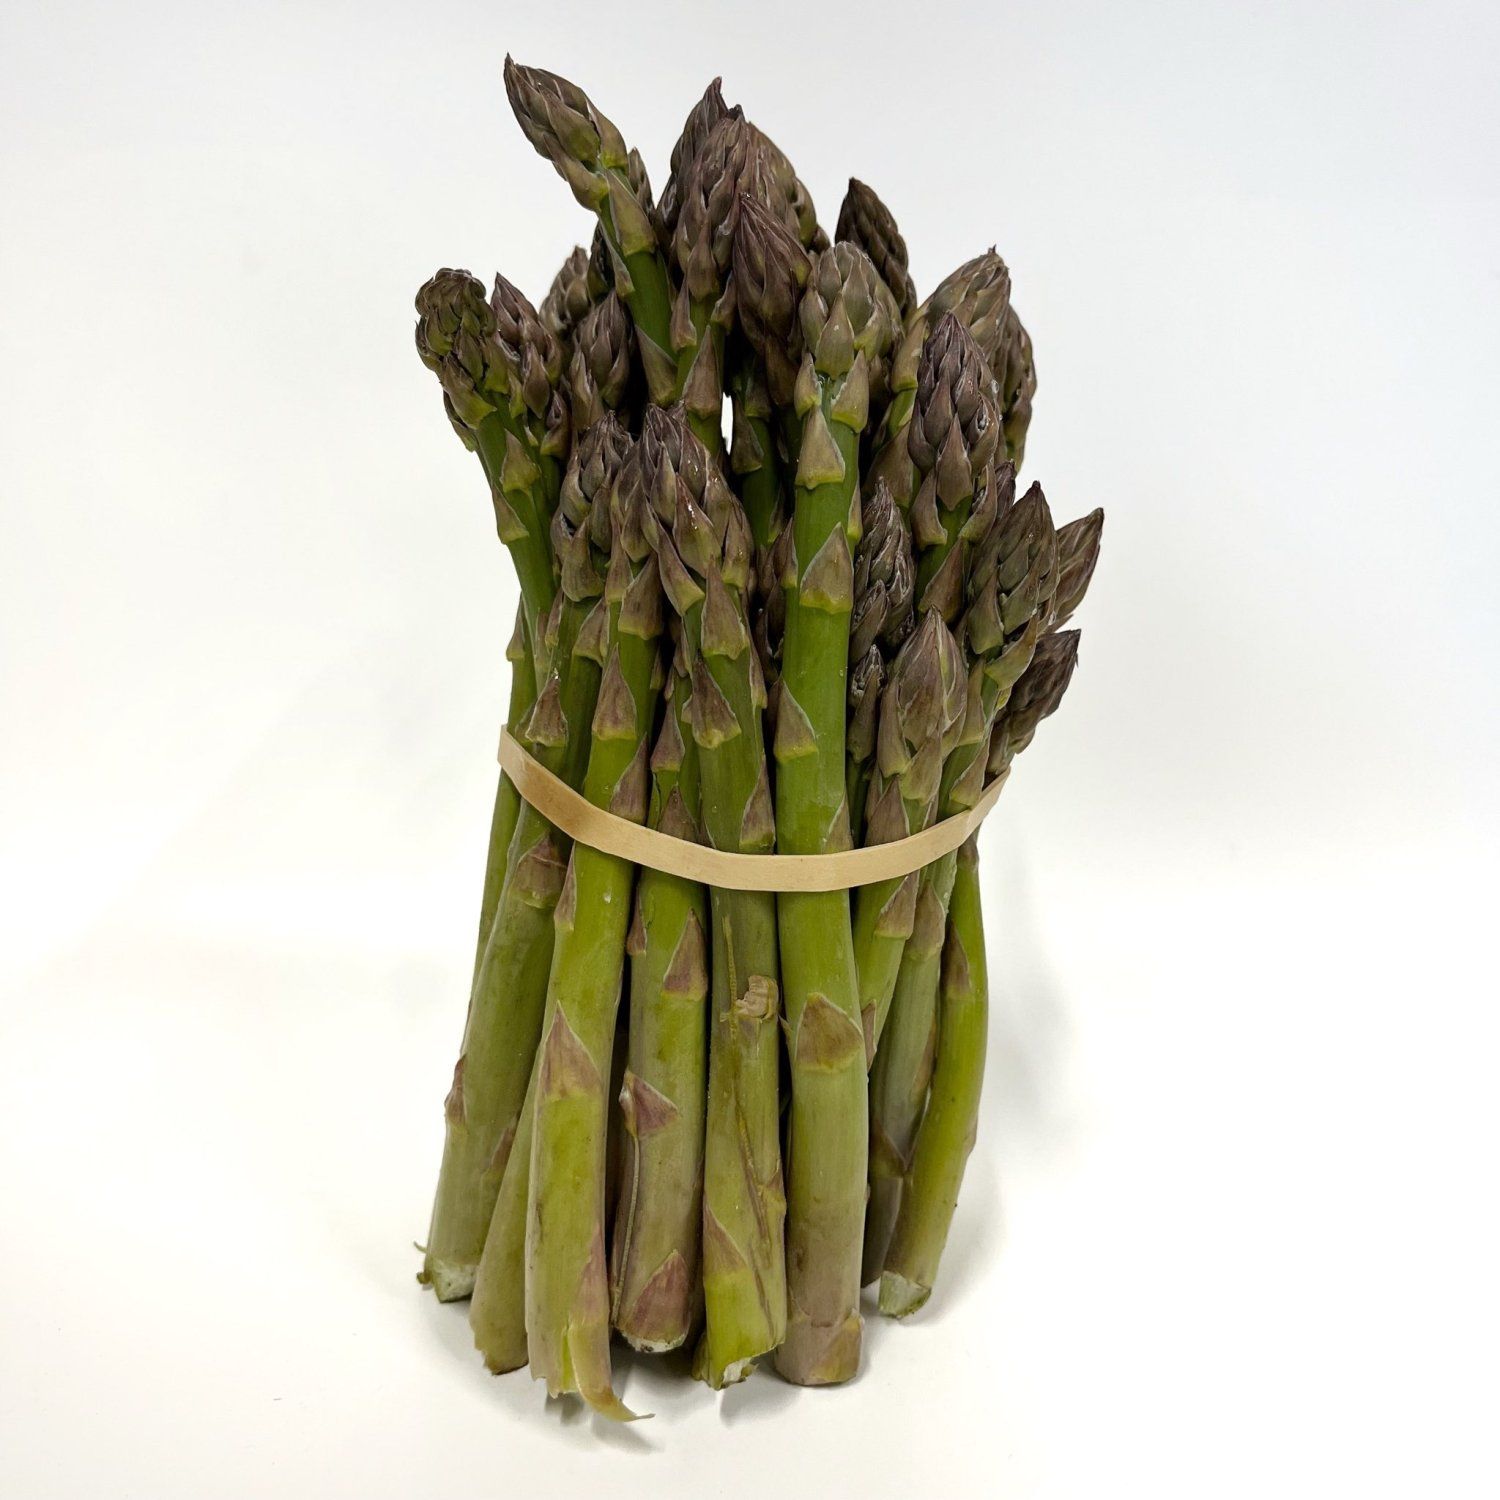 Previous Happening: We have asparagus!